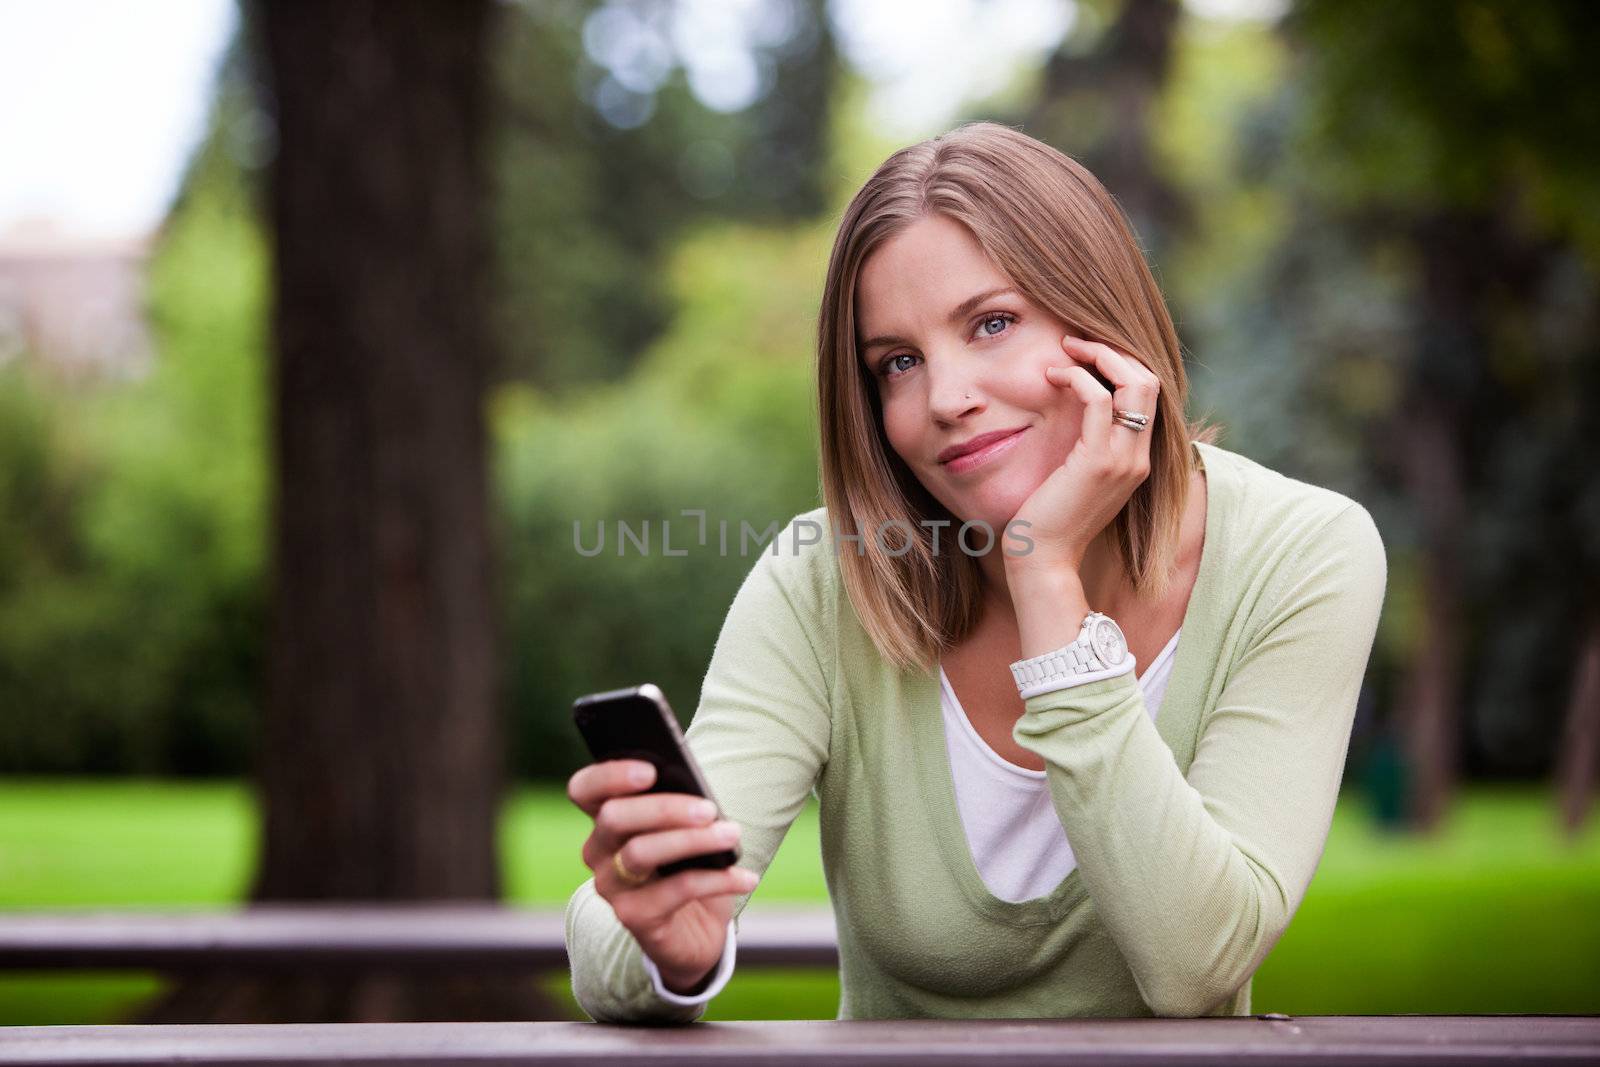 Woman holding Cell Phone in park.